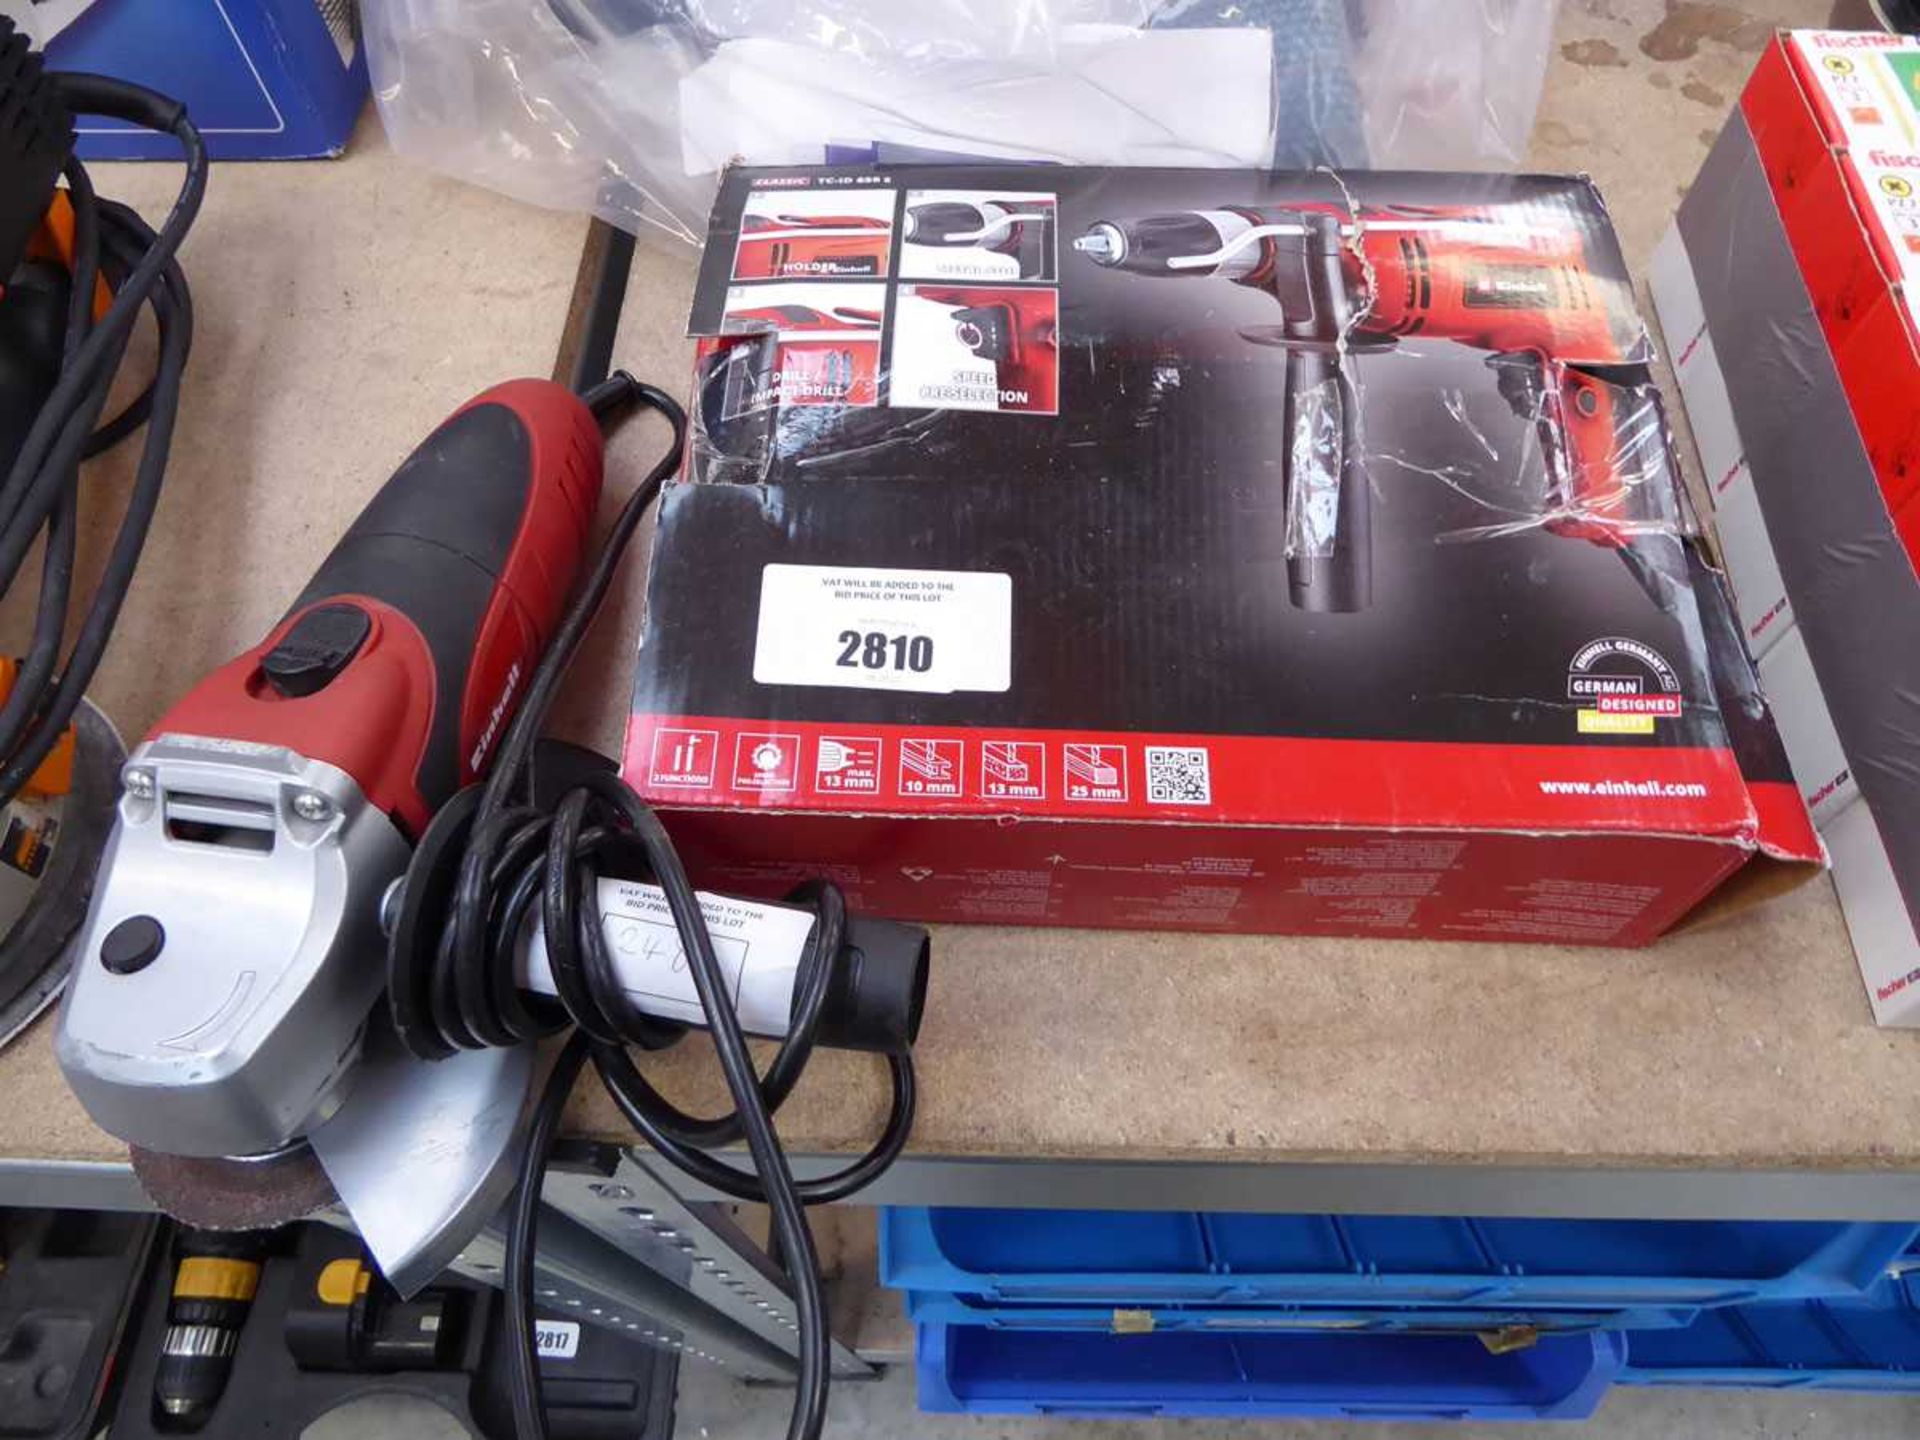 +VAT Einhell impact drill, boxed, together with an unboxed angle grinder